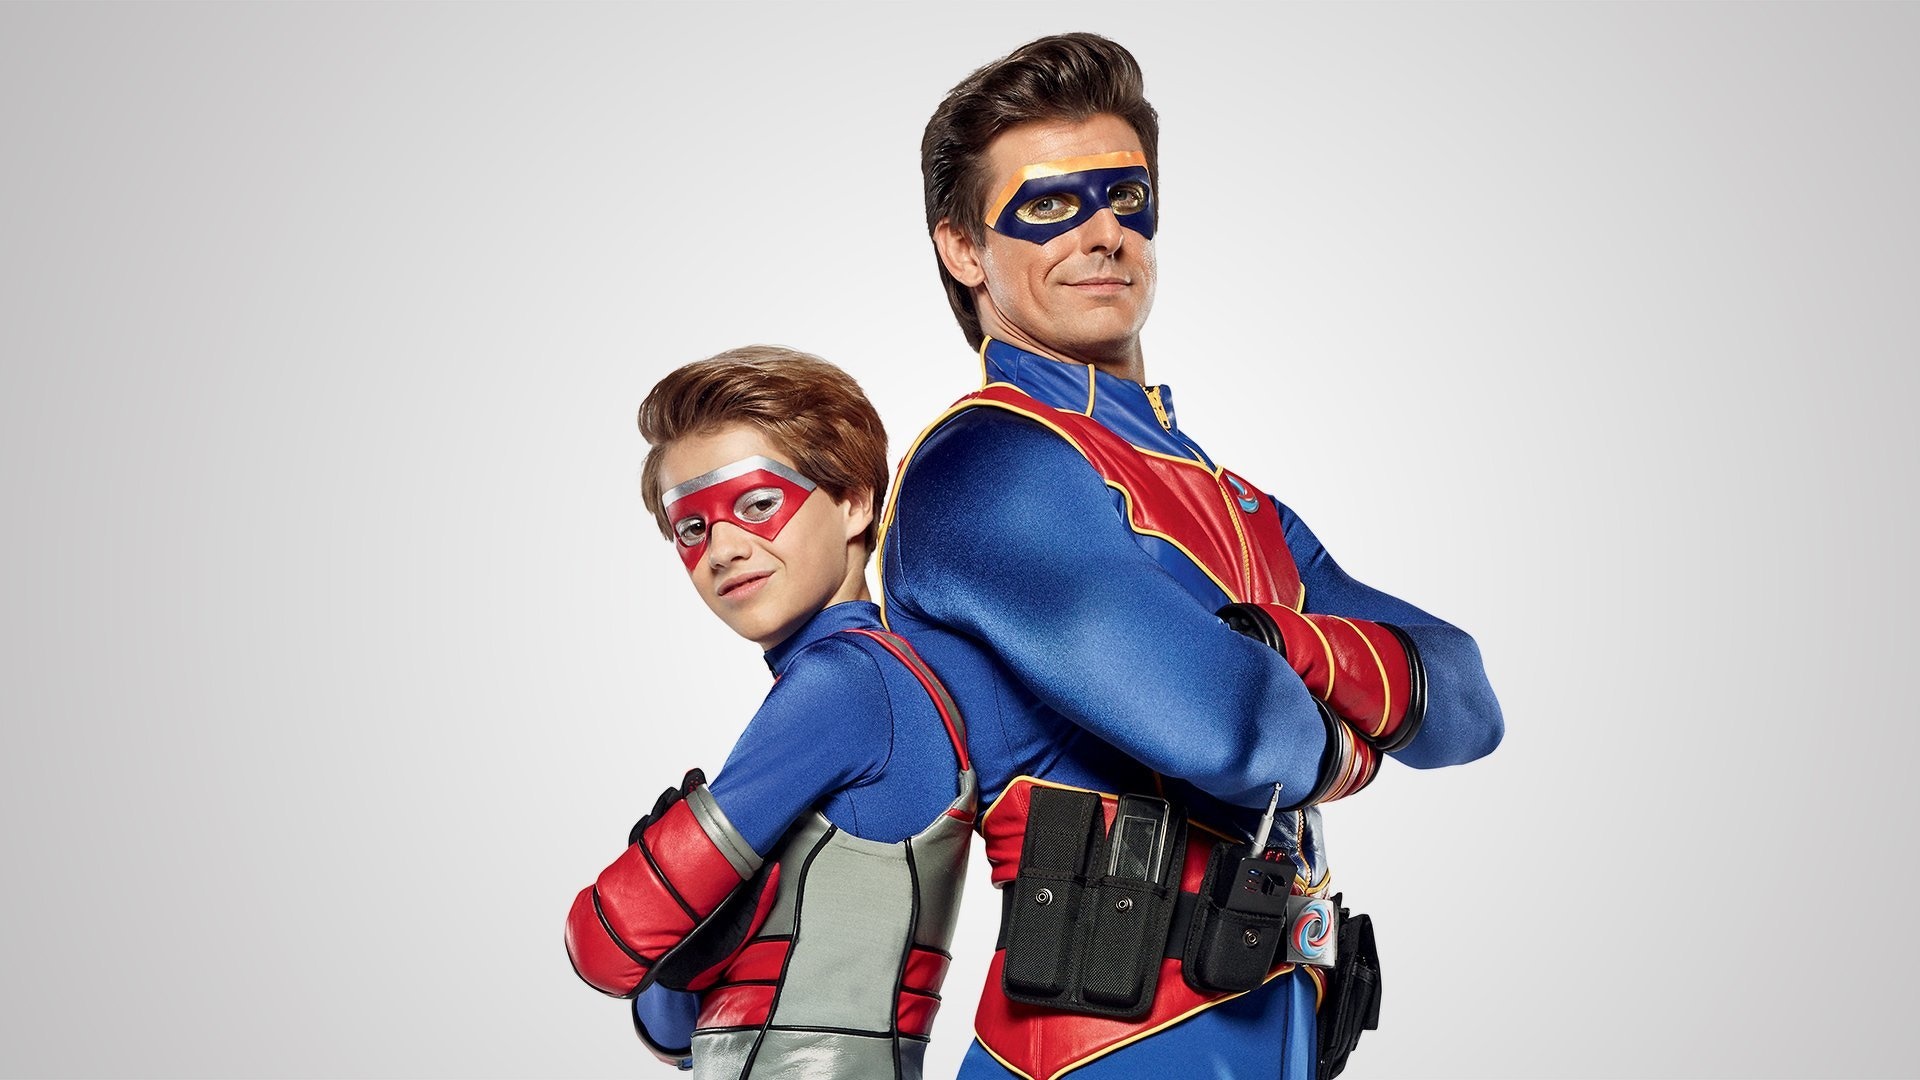 Henry Danger wallpapers, Nickelodeon theme, Ultimate fan collection, Supertab themes, 1920x1080 Full HD Desktop